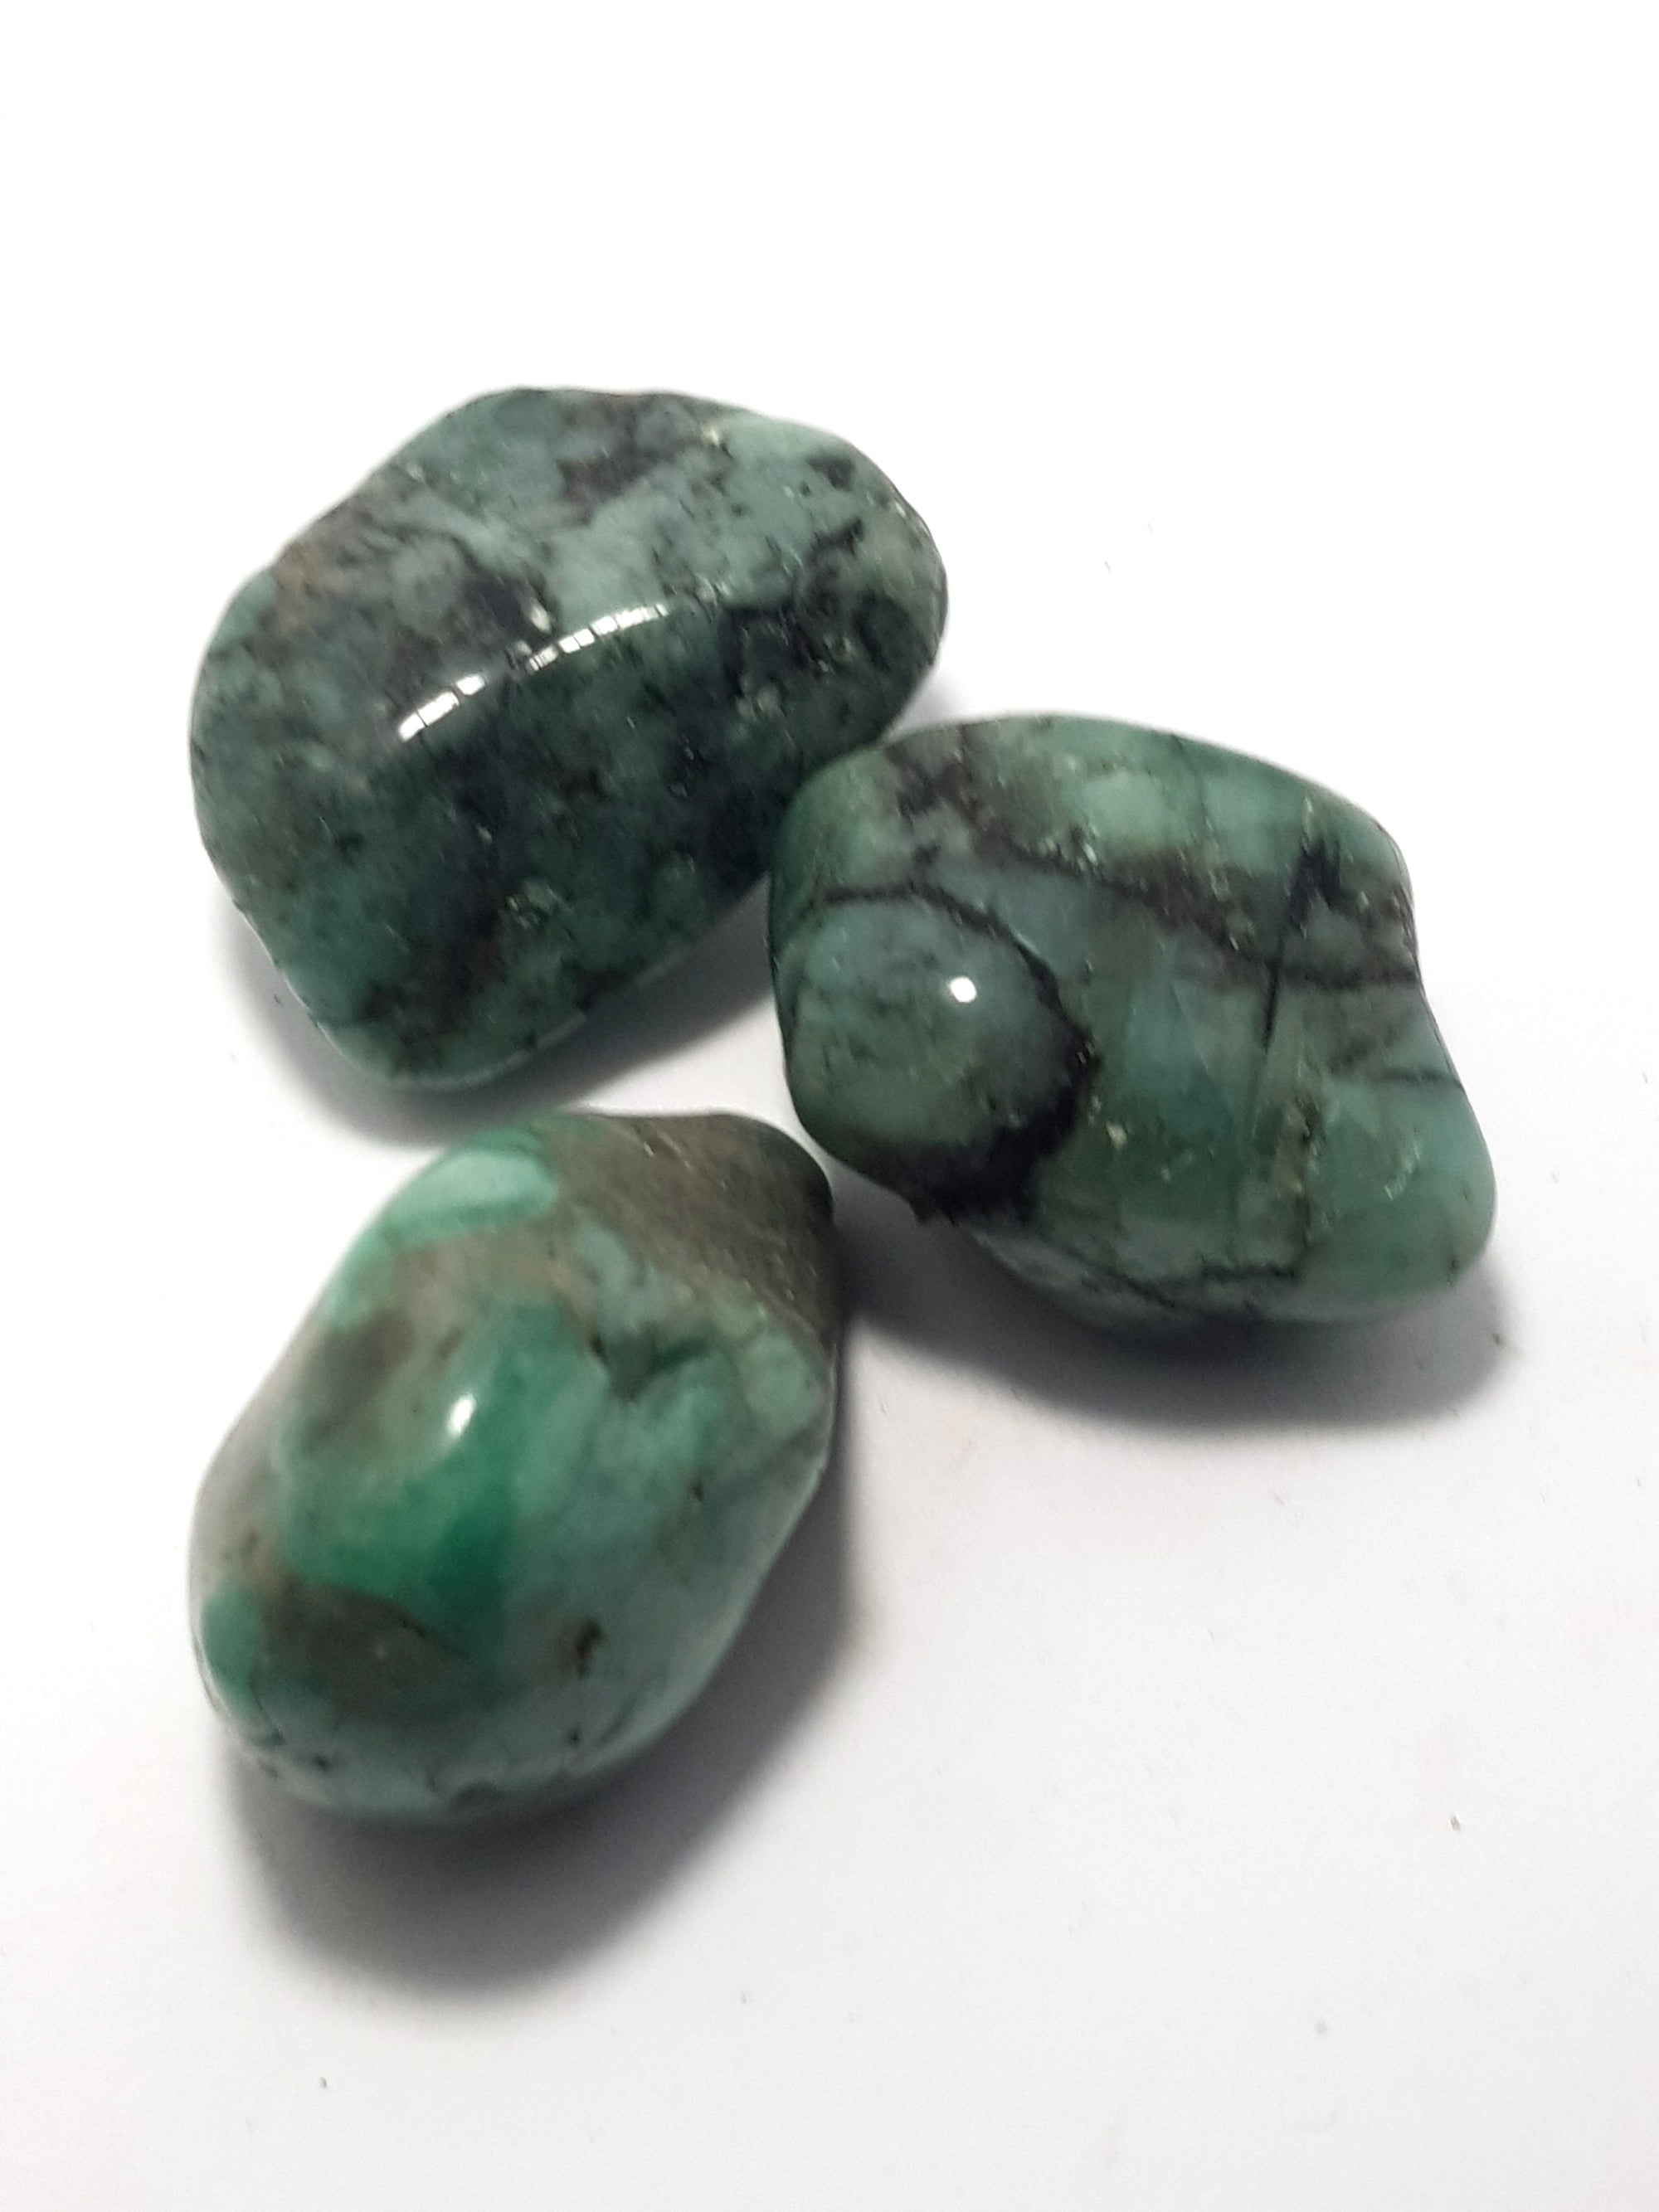 Tumbled emeralds. They are a deep green with black veining. The pieces are polished but  irregularly shaped.